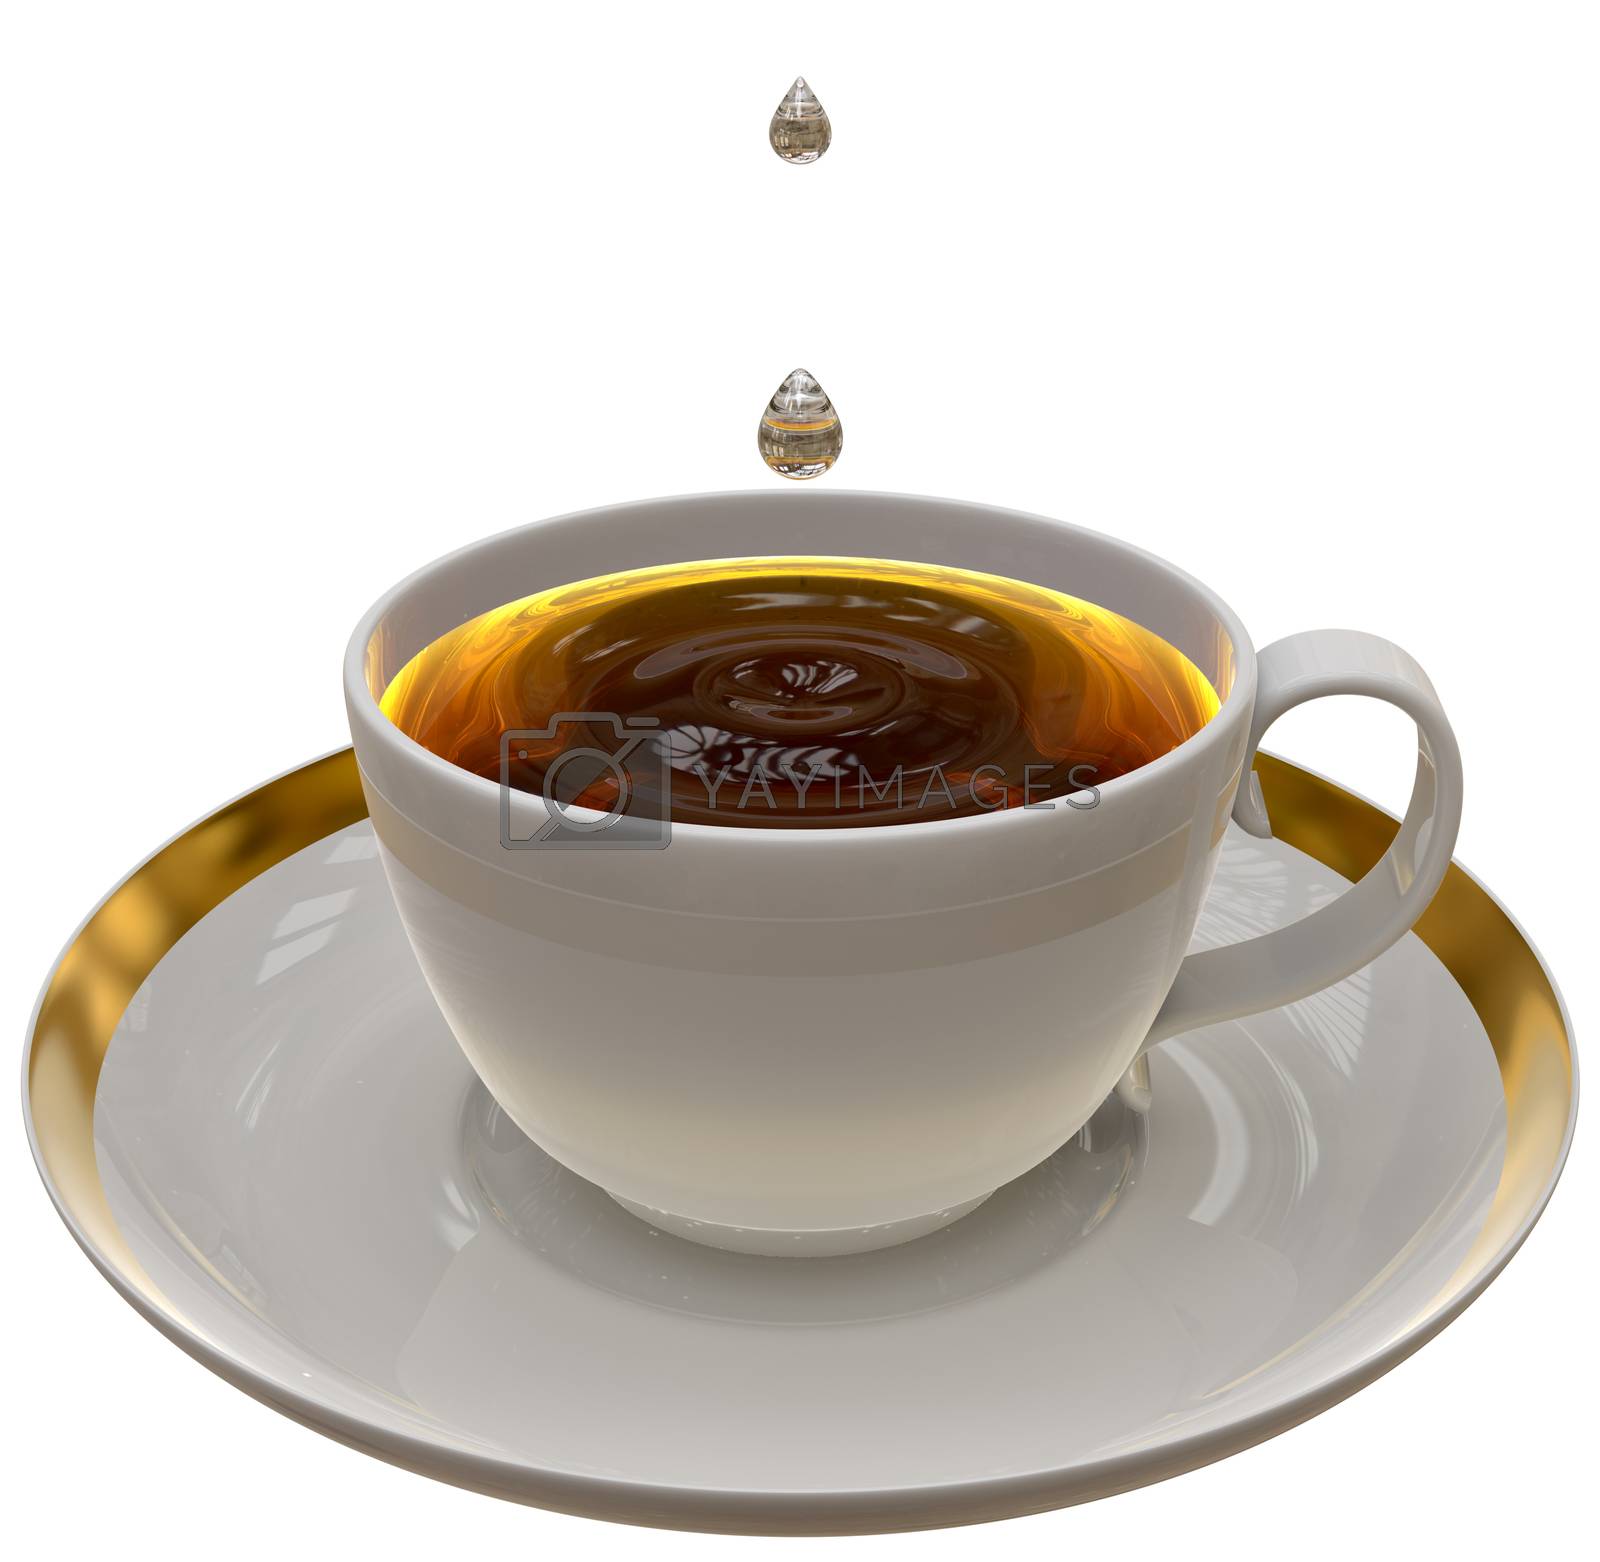 Royalty free image of Cup of tea or coffee by merzavka